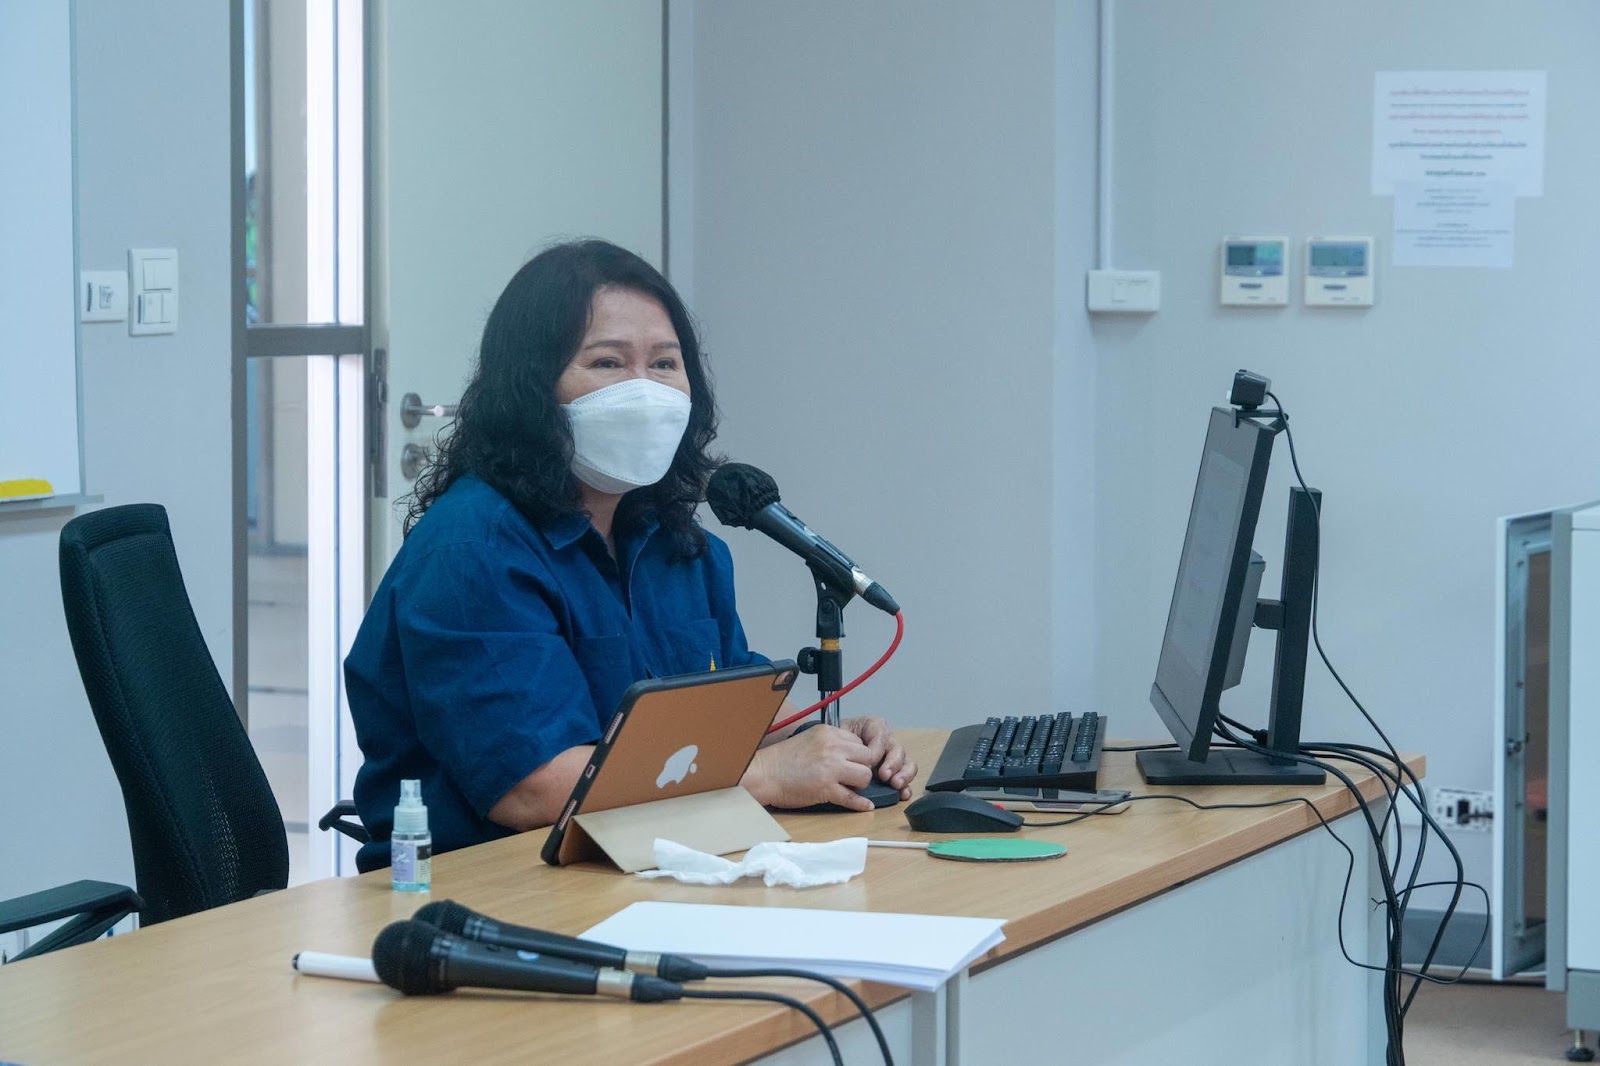 A person wearing a mask and sitting at a desk with a microphone Description automatically generated with medium confidence